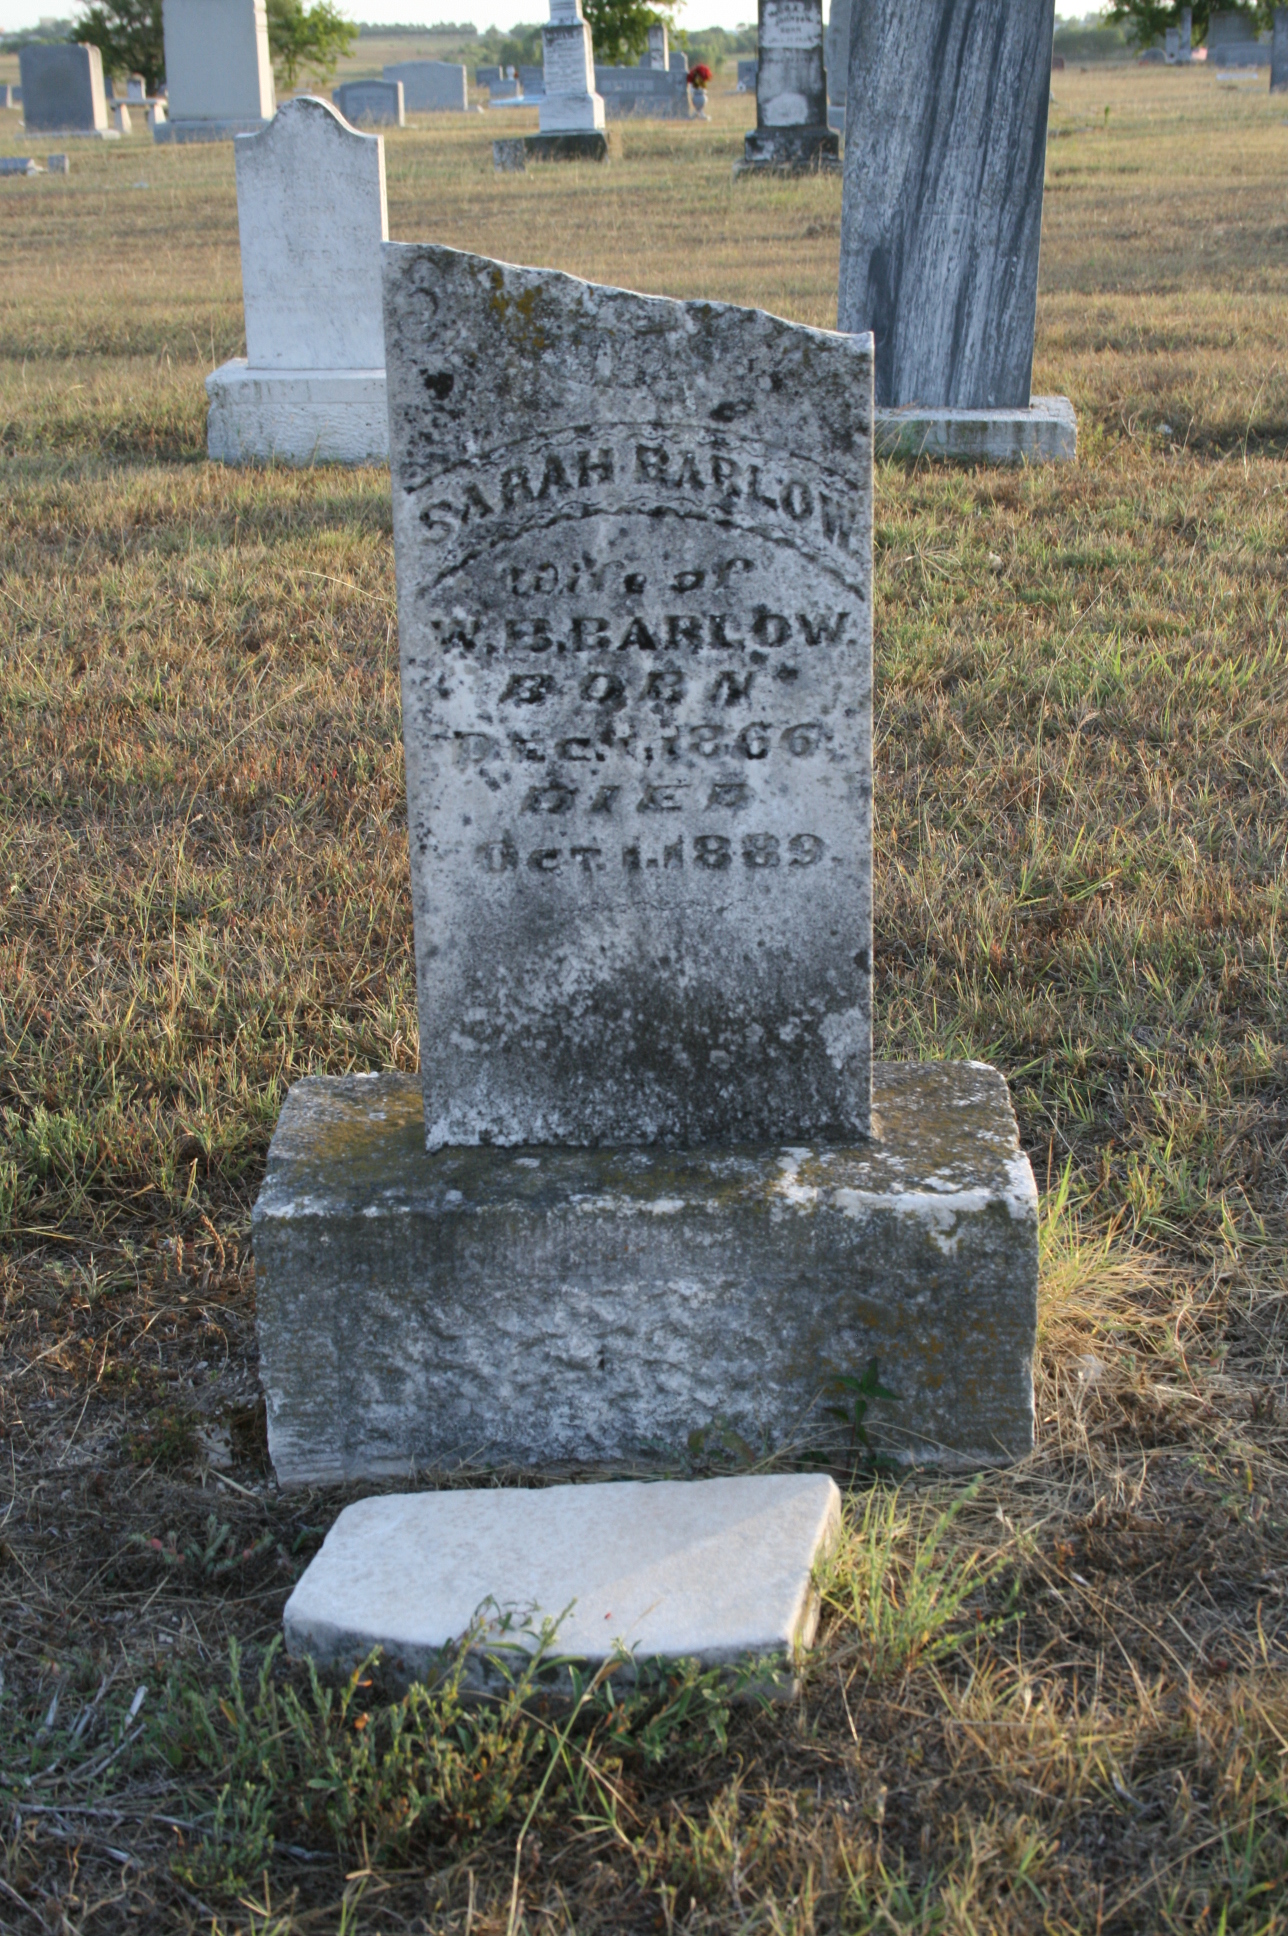 a stone headstone in a grave yard